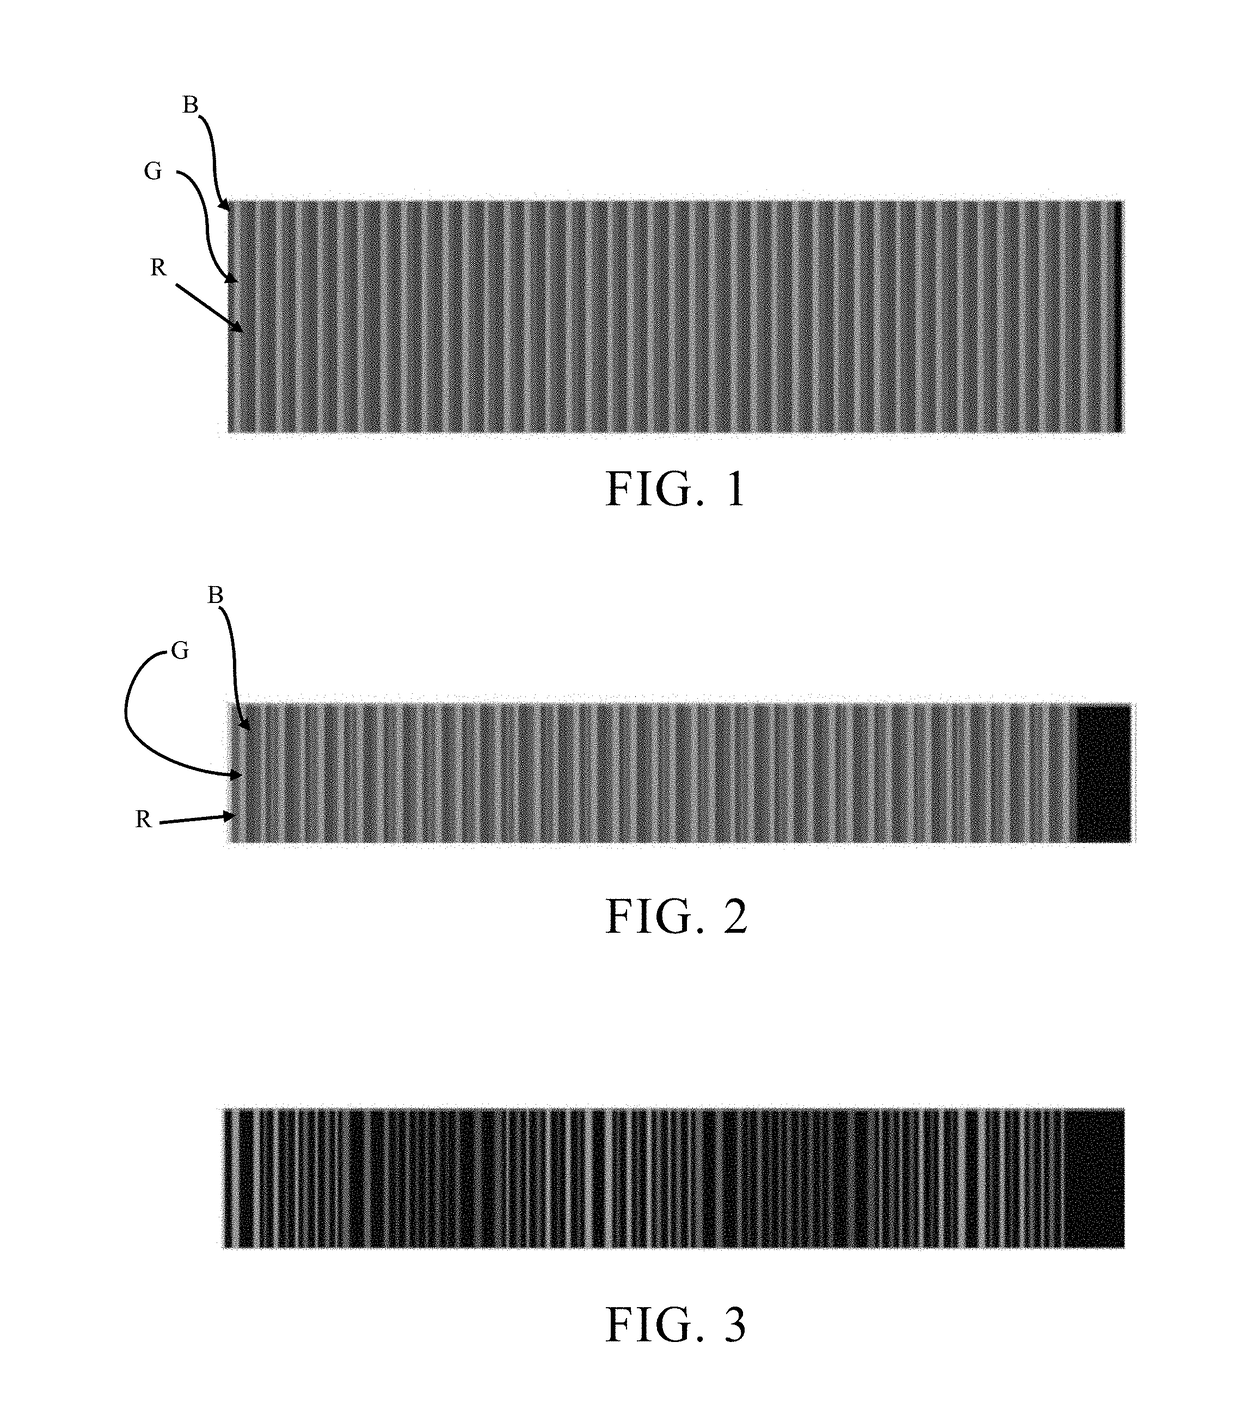 Method and system for reducing fresnel depolarization to improve image contrast in a display system including multiple displays